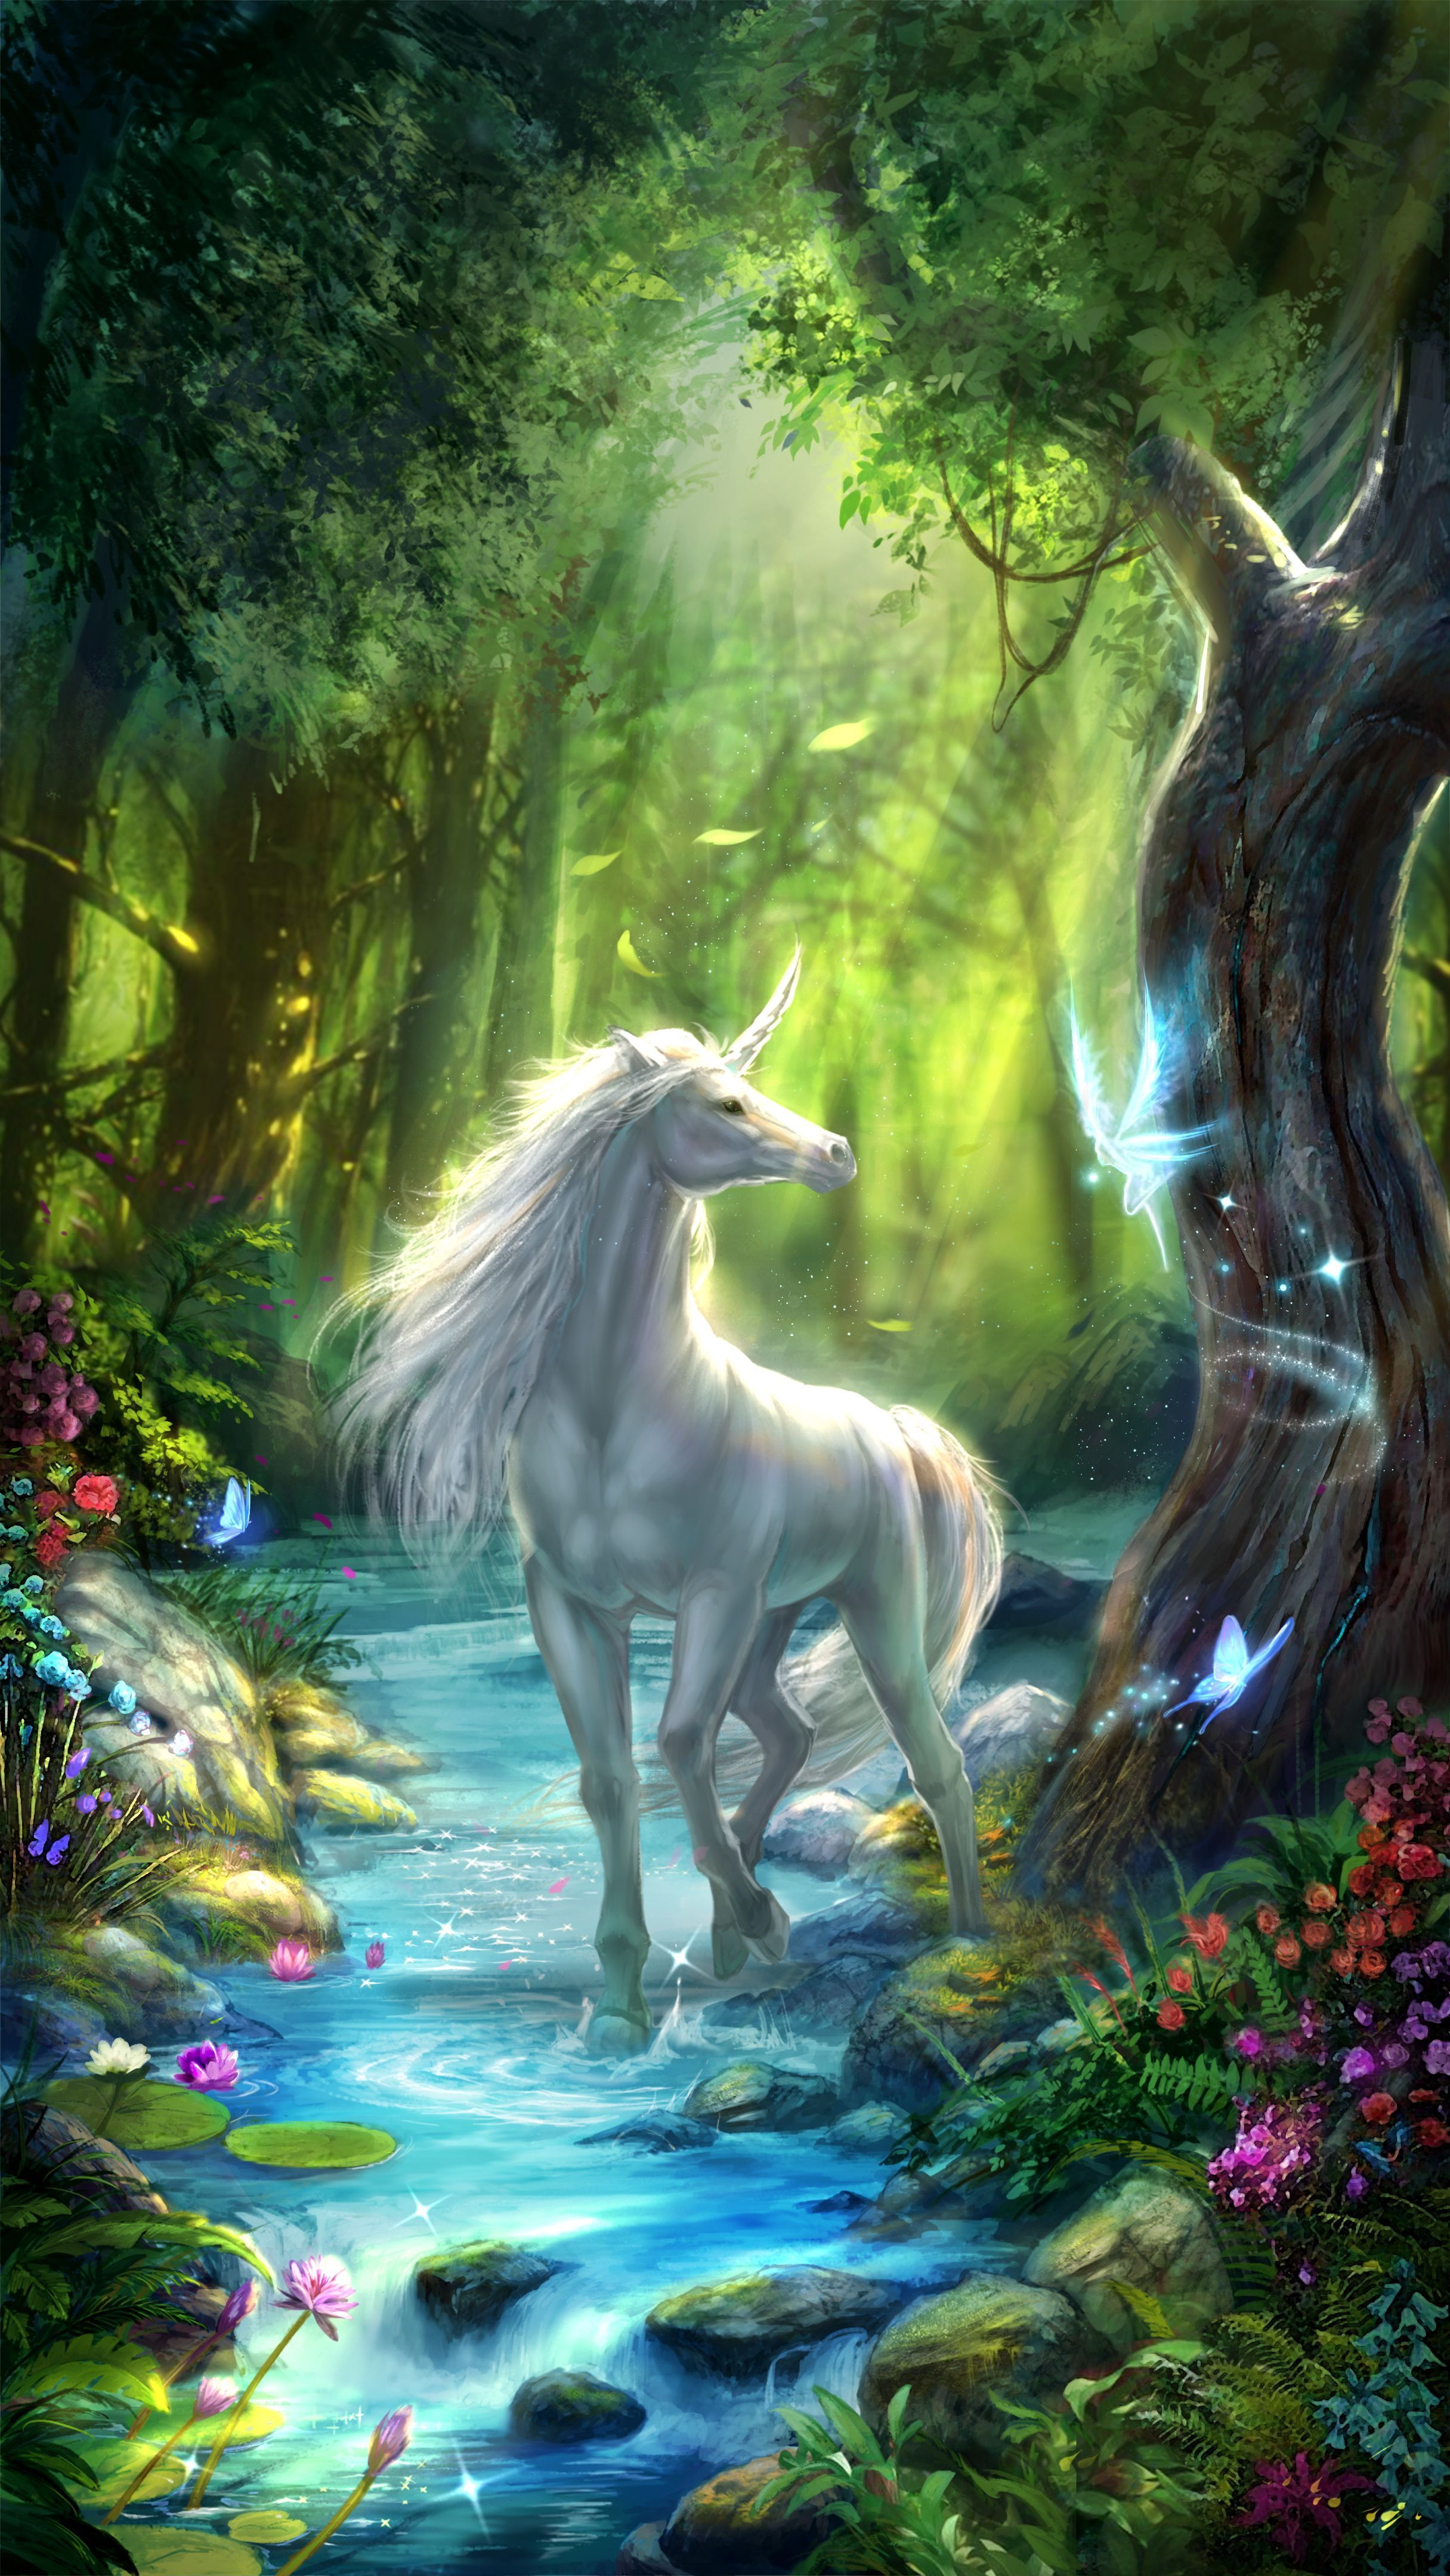 white live wallpaper,nature,unicorn,mythical creature,fictional character,natural landscape